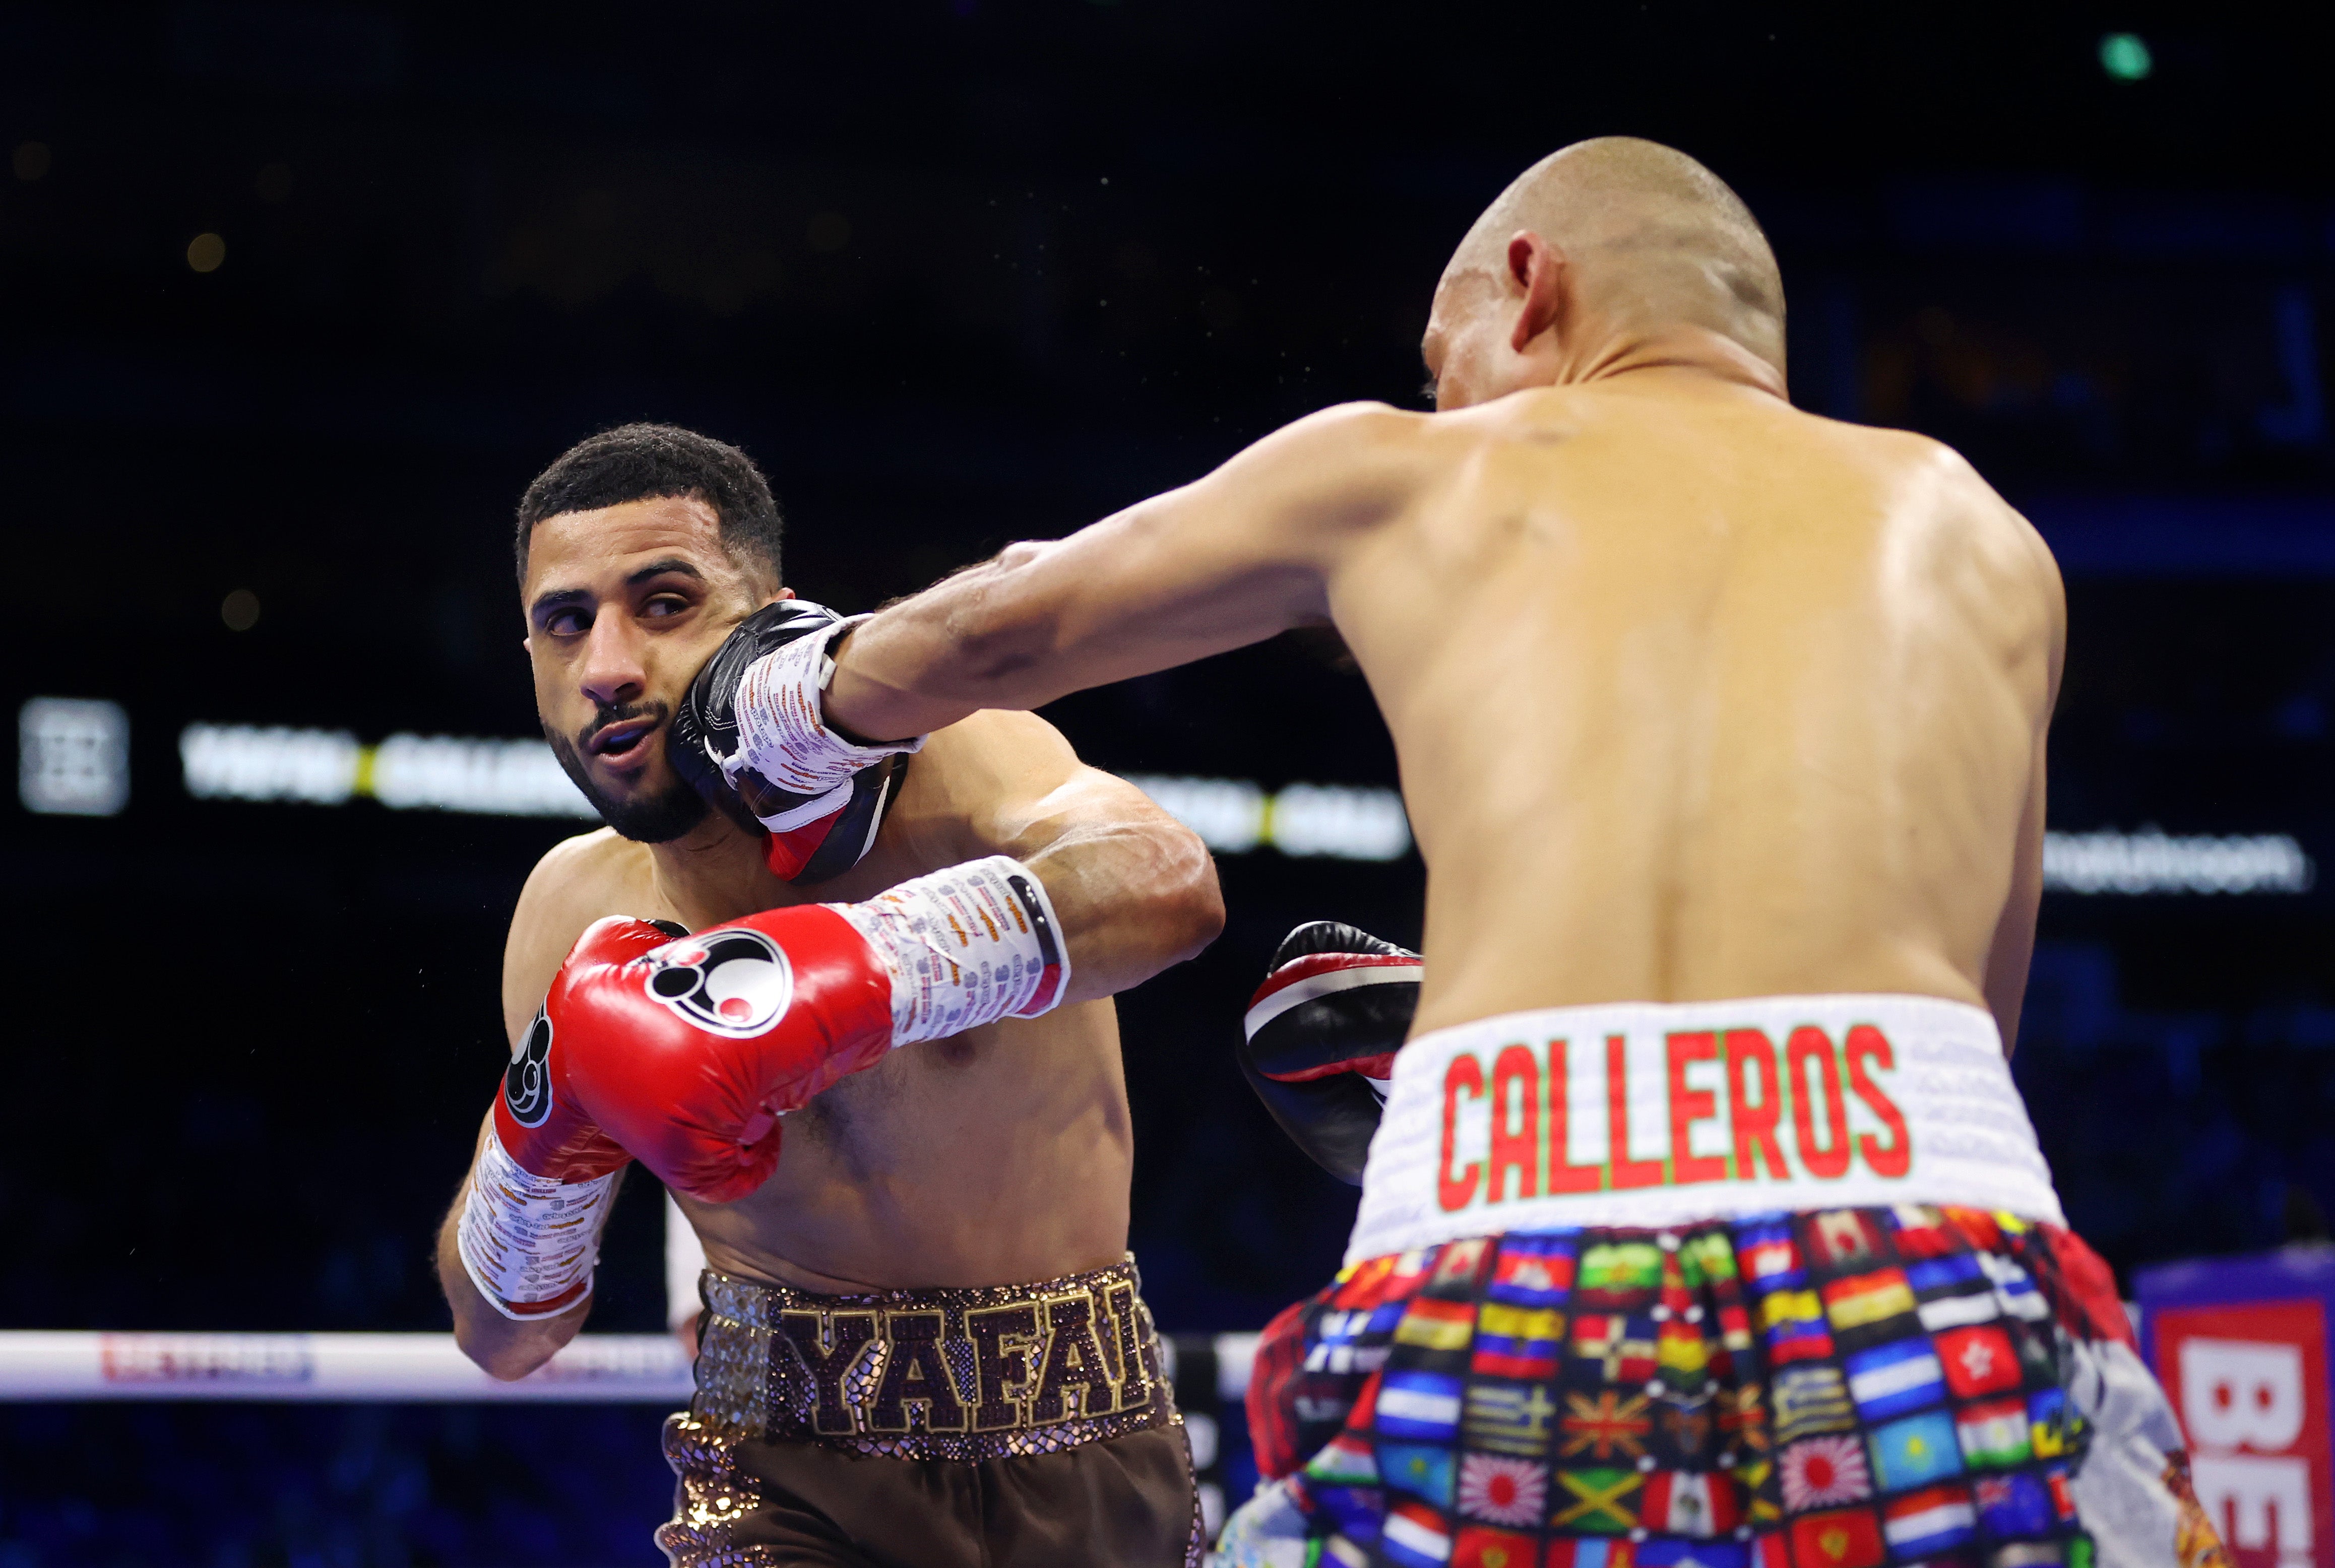 Moises Calleros fought Galal Yafai at the O2 Arena on the undercard of an Anthony Joshau fight